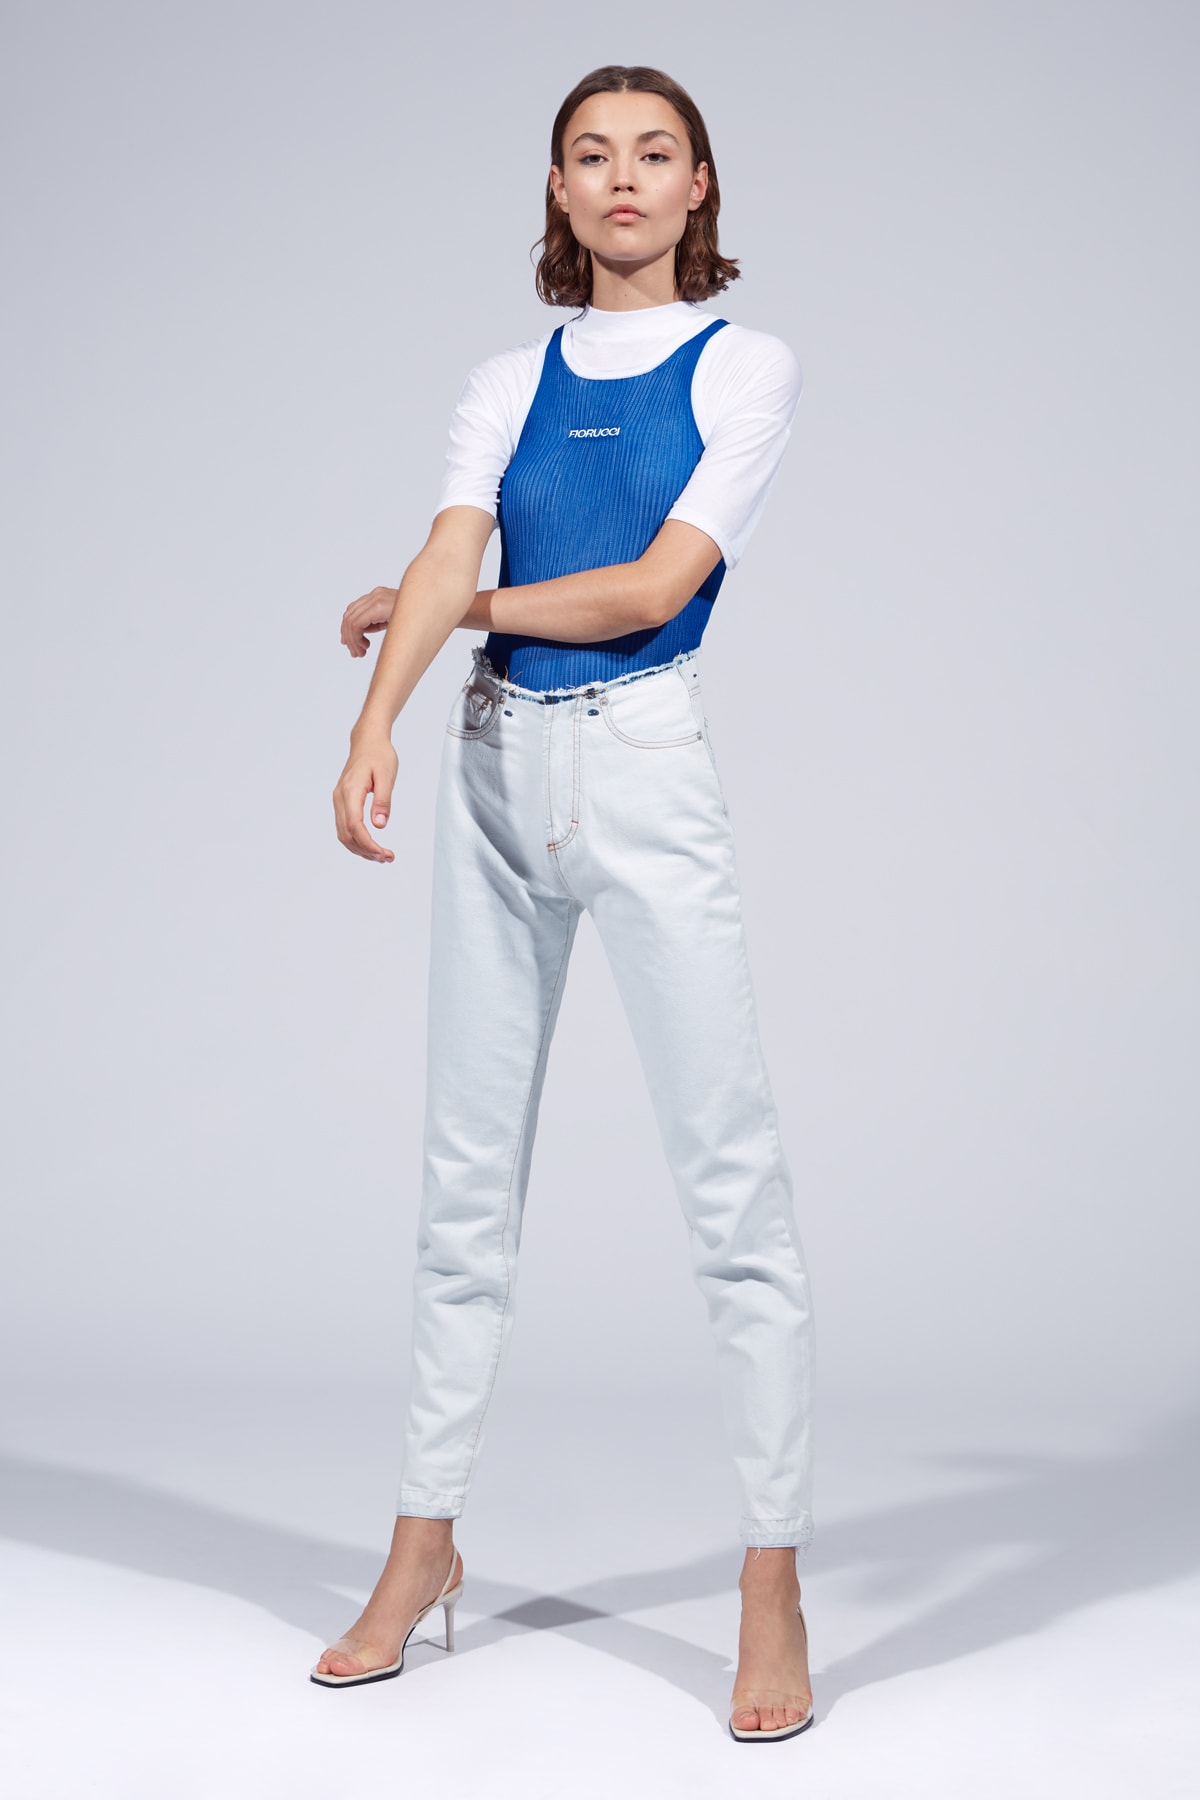 Fiorucci Spring Summer 2019 Collection Lookbook Tank Top Blue T-shirt White